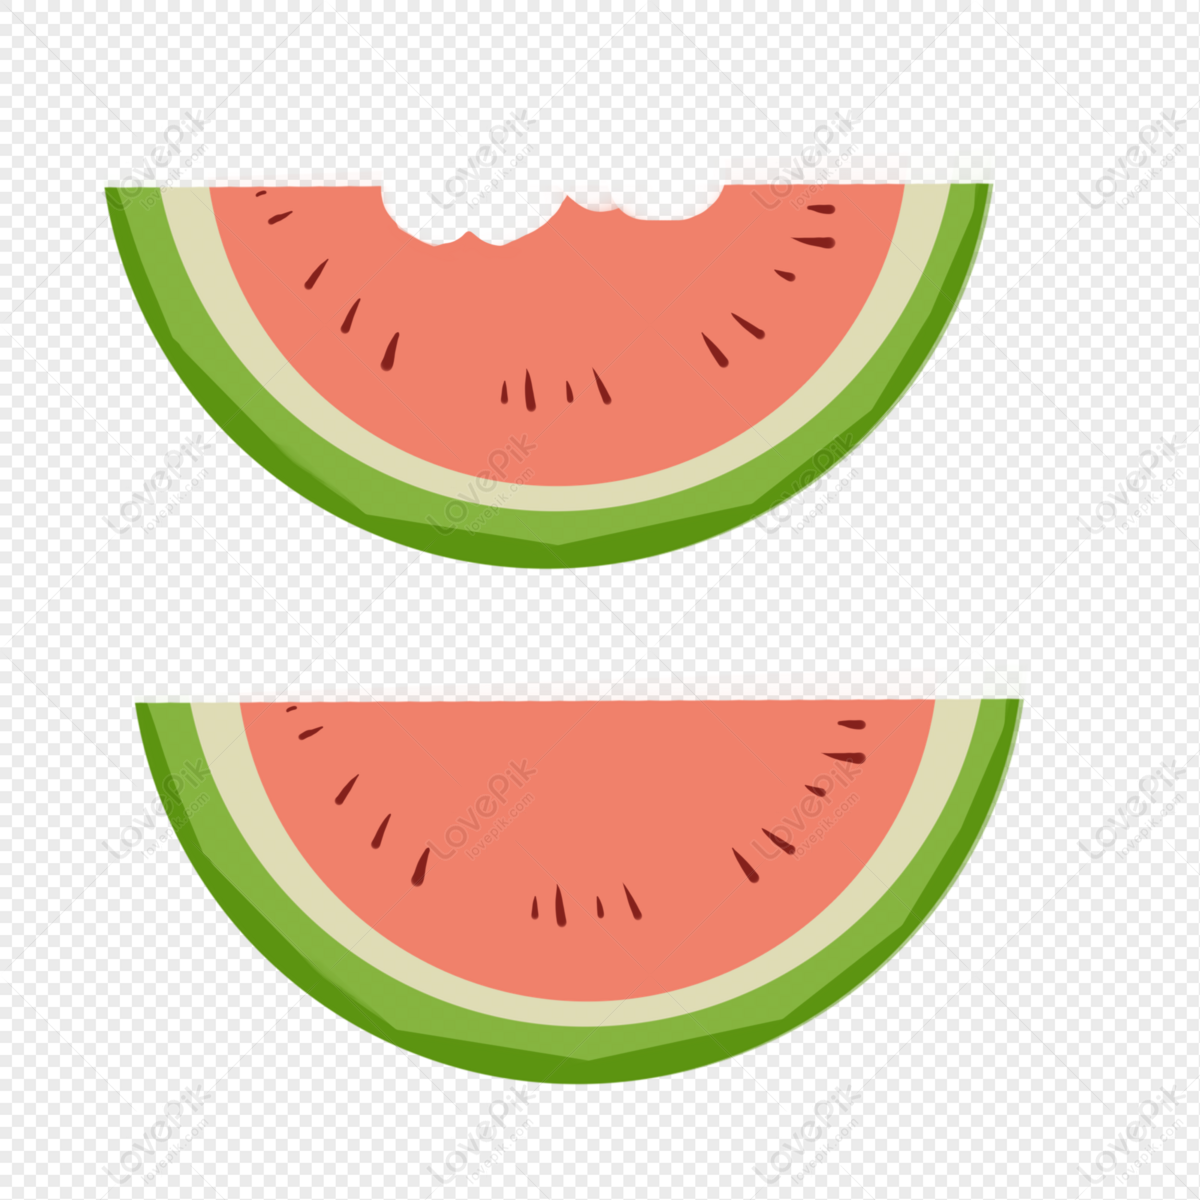 Half Moon Shape Cartoon Watermelon PNG Transparent And Clipart Image For  Free Download - Lovepik | 401350906